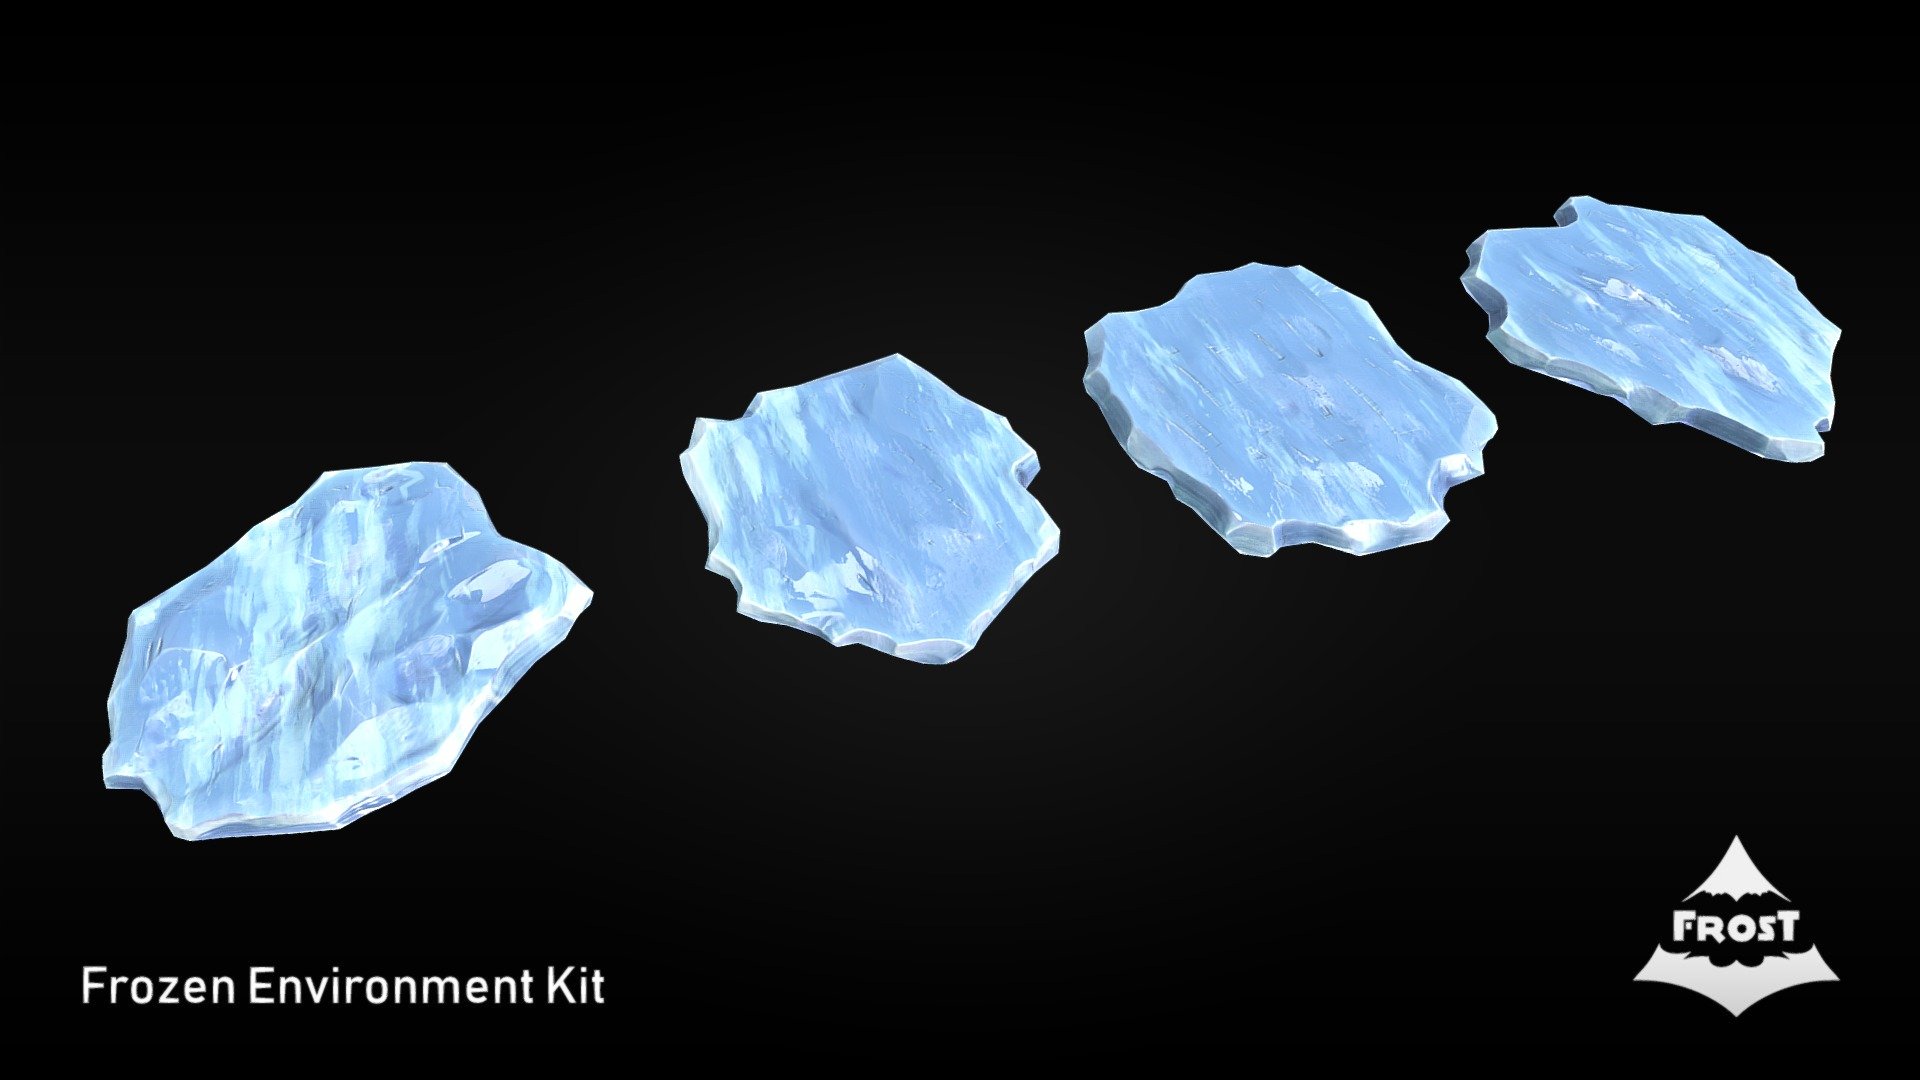 This pack is a fully PBR driven part of my FROST asset pack.
It contains the following assets:




4 Textured Frost Ice Floes

Each asset comes with 4K resolution Albedo, Glossiness, Roughness, Normal, Emission, Specular Color, Specular Level, AO and Height Maps.
The Height Maps can be used in game or rendering engines to blend other textures with the asset. The textures were atlased onto a single texture sheet.
All of the assets are based on manually created high poly sculpts and had their textures specifically created for them. They were optimized for use in realtime game engines.
As PBR assets they are recommended for desktop but the polycount will have no problem running on mobile as well and can still be further reduced if necessary.

The FROST Environment Kit is split as separate packages so that you can purchase only those assets that you really need, for a significantly lower price compared to a full asset pack 3d model